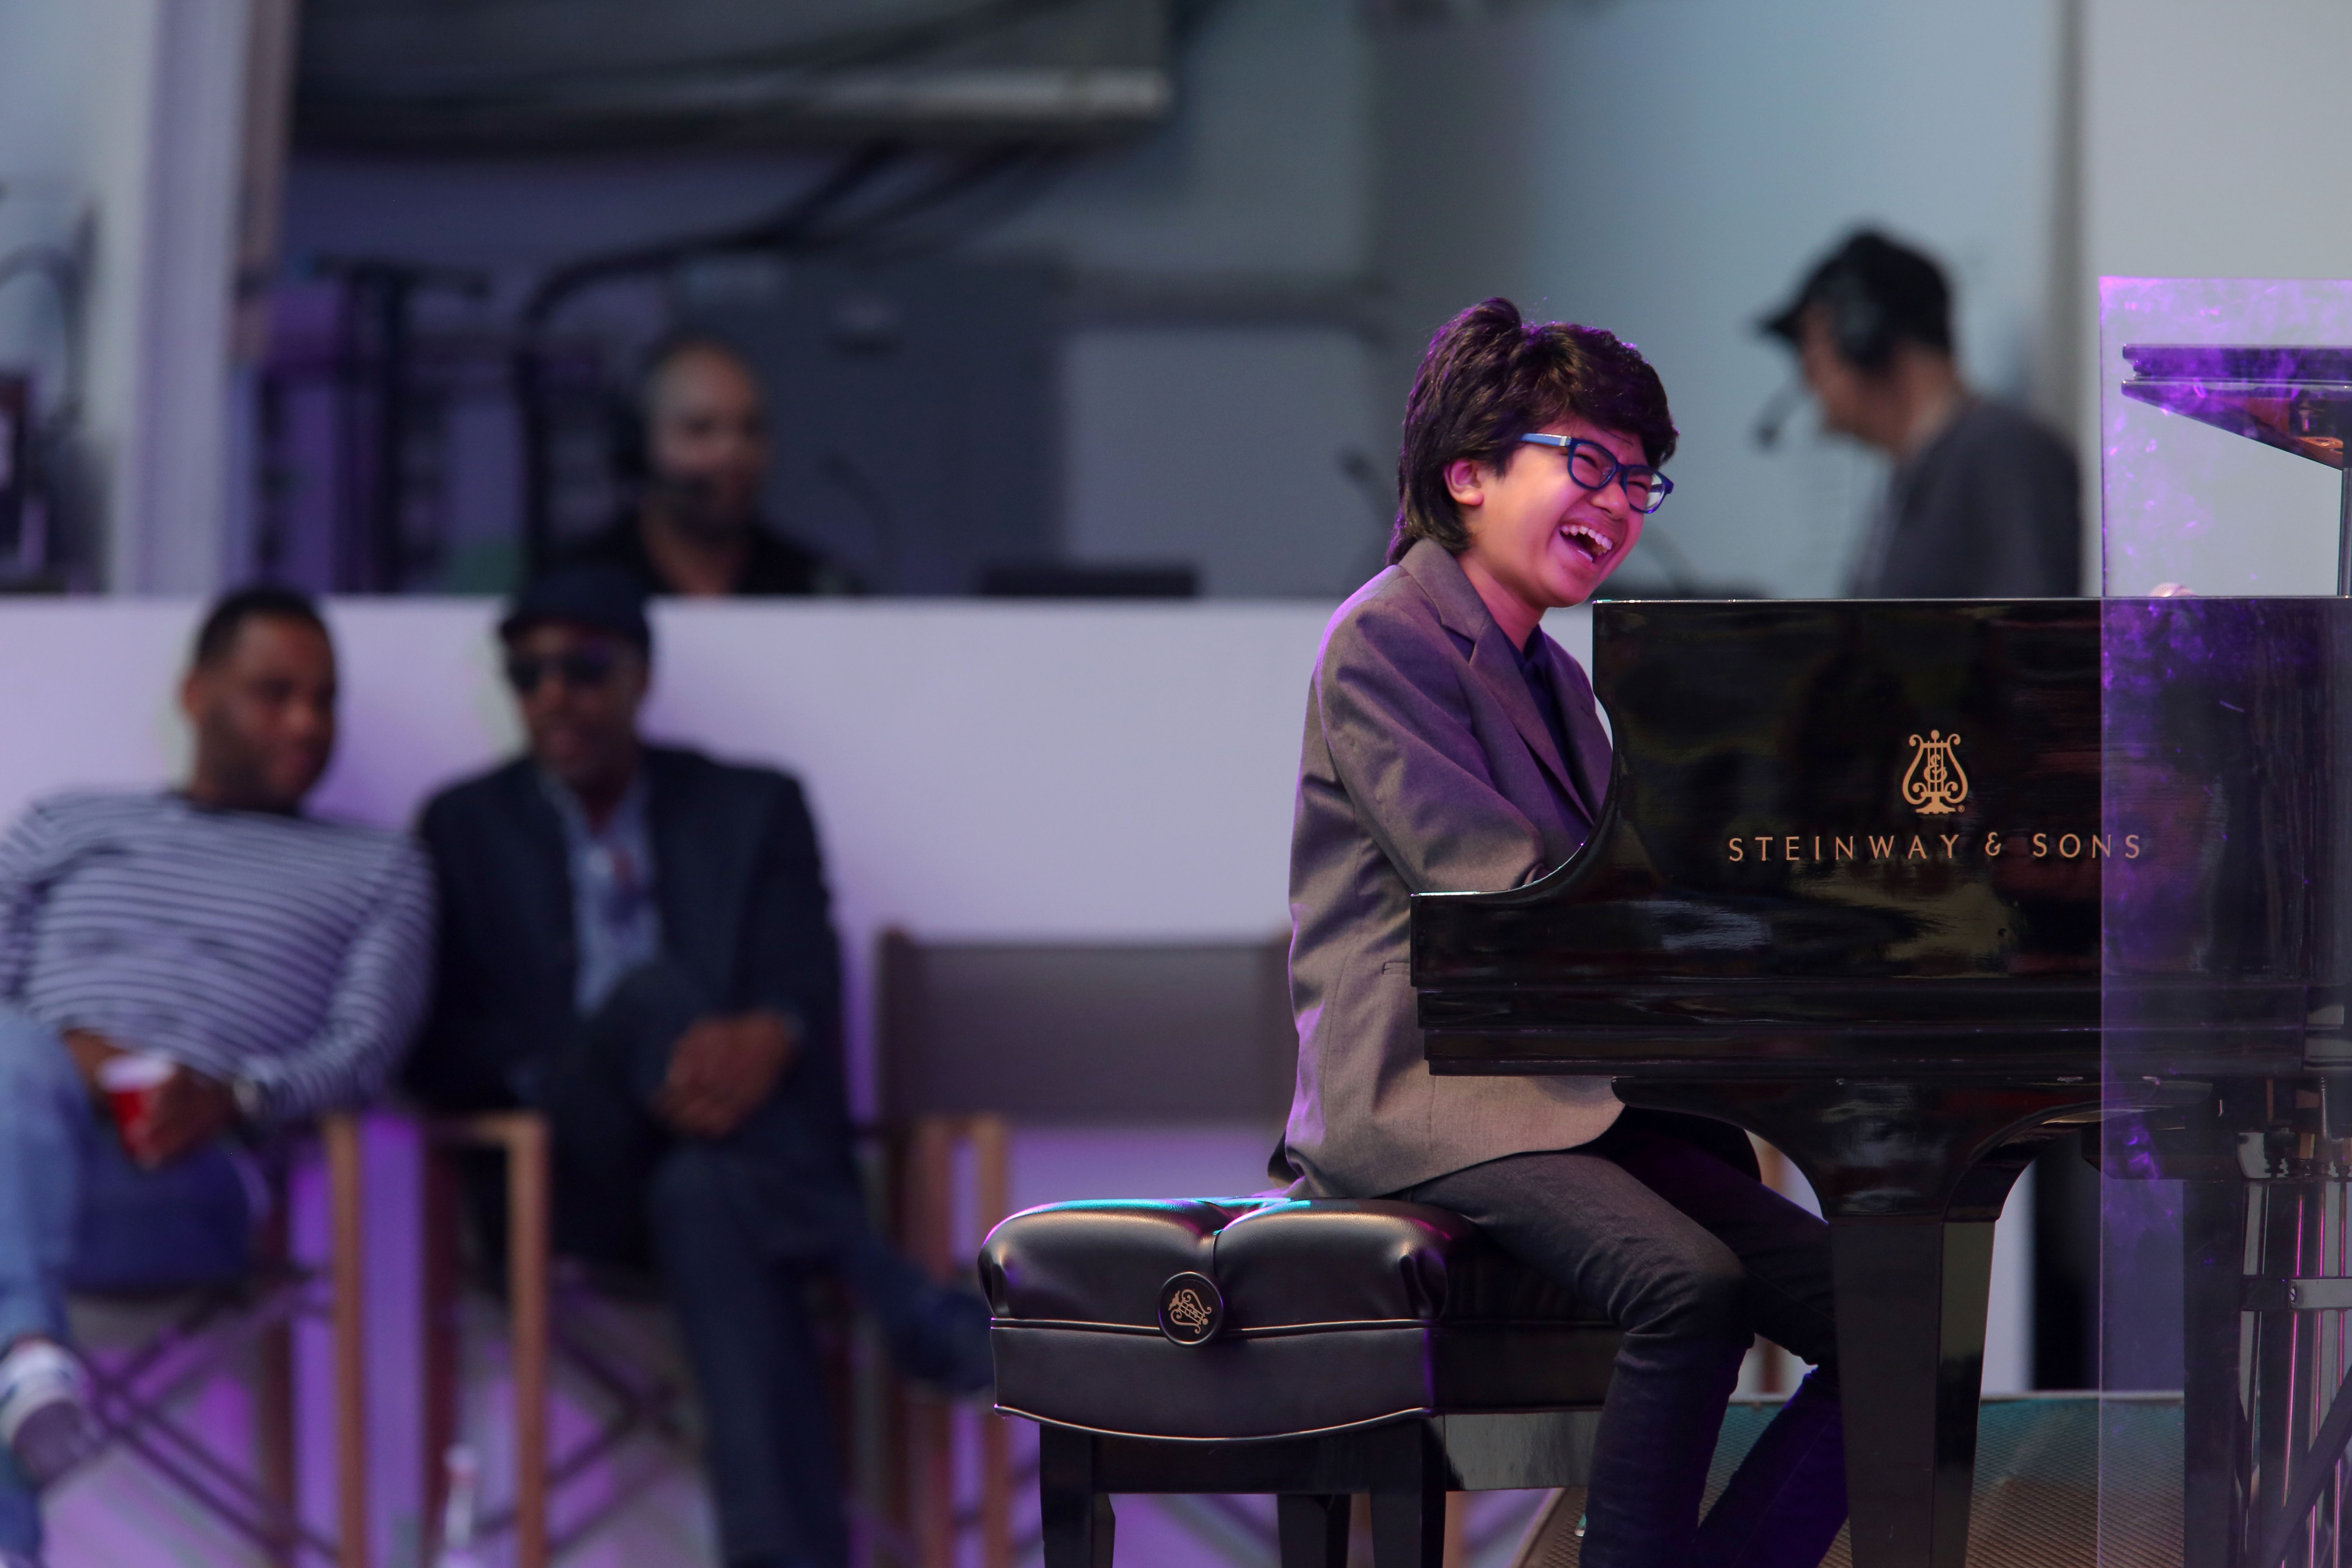 HOLLYWOOD, CA - JUNE 11: Pianist Joey Alexander of the Joey Alexander Trio performs onstage at the Hollywood Bowl Presents the 38th Anniversary Playboy Jazz Festival Day 1 at the Hollywood Bowl on June 11, 2016 in Hollywood, California. (Photo by Mathew Imaging/WireImage) *** Local Caption *** Joey Alexander